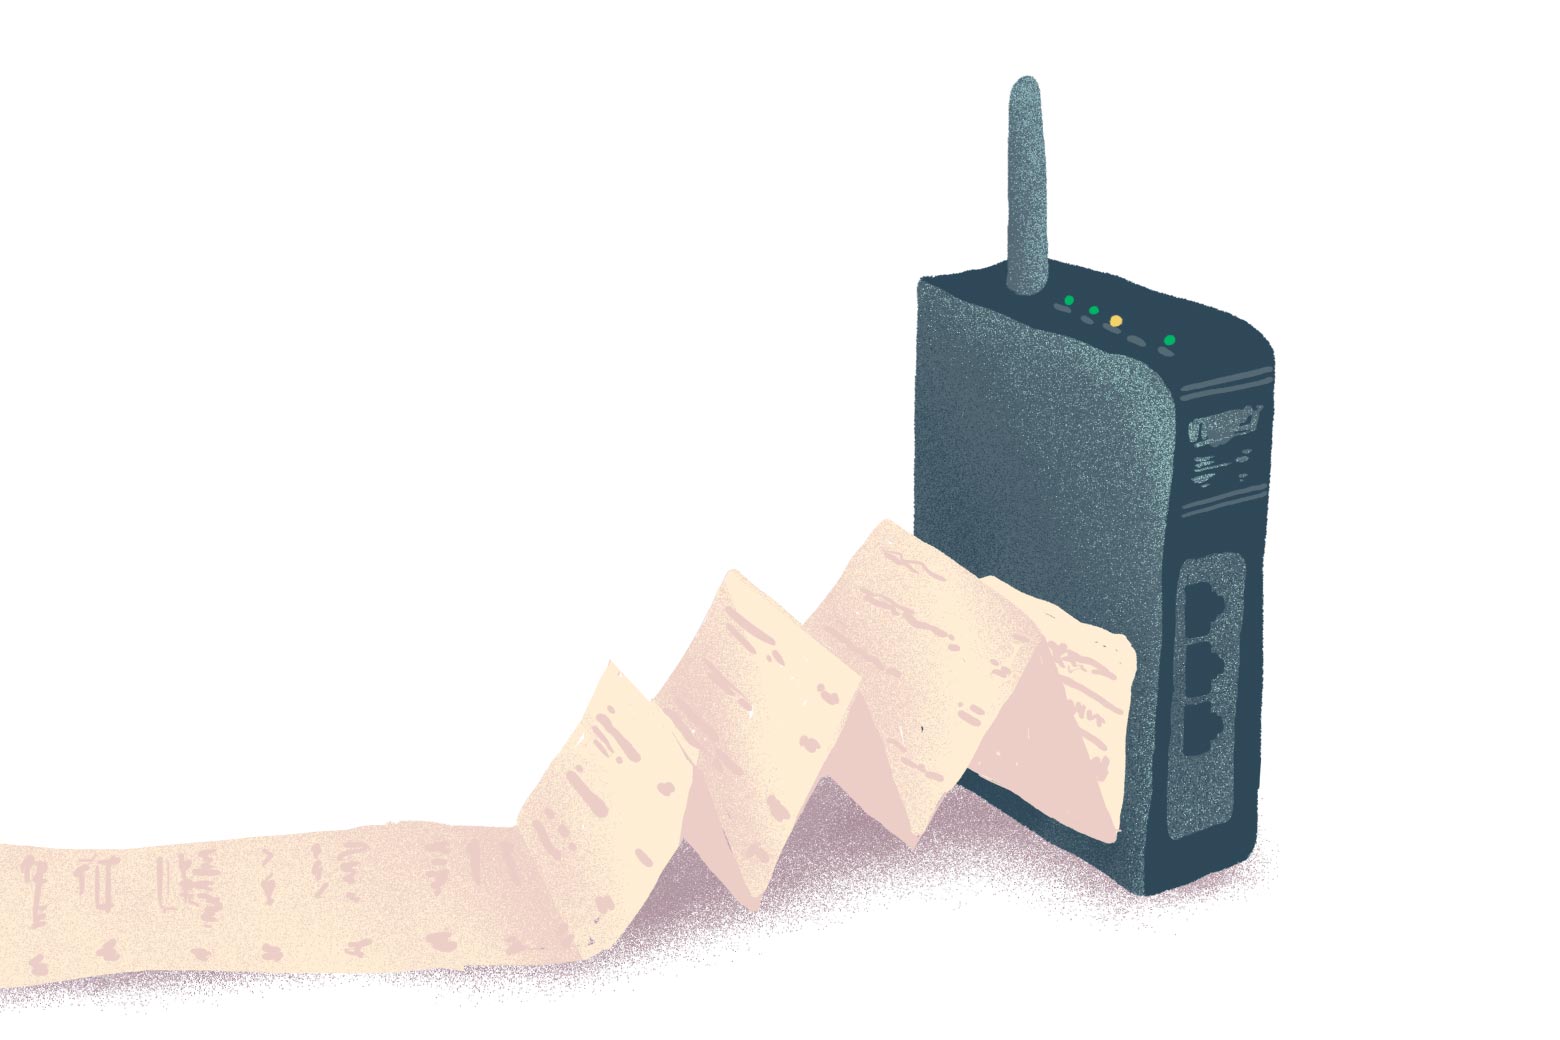 Wifi Modem with long receipt attached. 